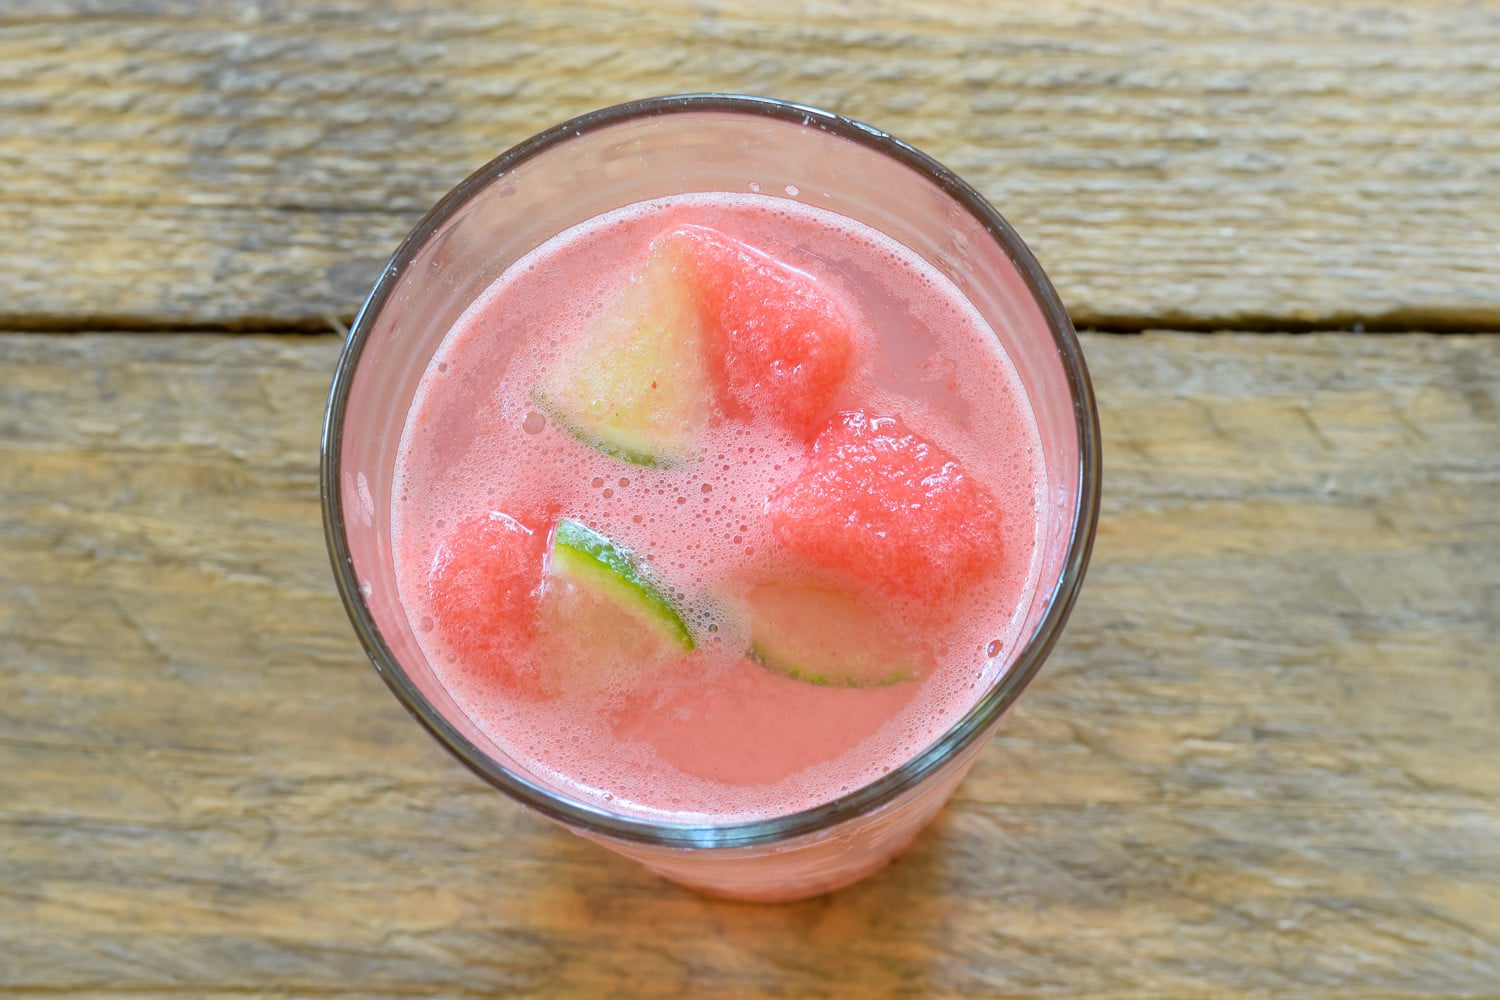 Fruit Ice Cubes are the perfect way to add flavor to your water or favorite beverages this summer. Cucumber/Mint, Watermelon/Lime and Blueberry/Lavender are delicious combinations and make getting that daily water quota all the more enjoyable.